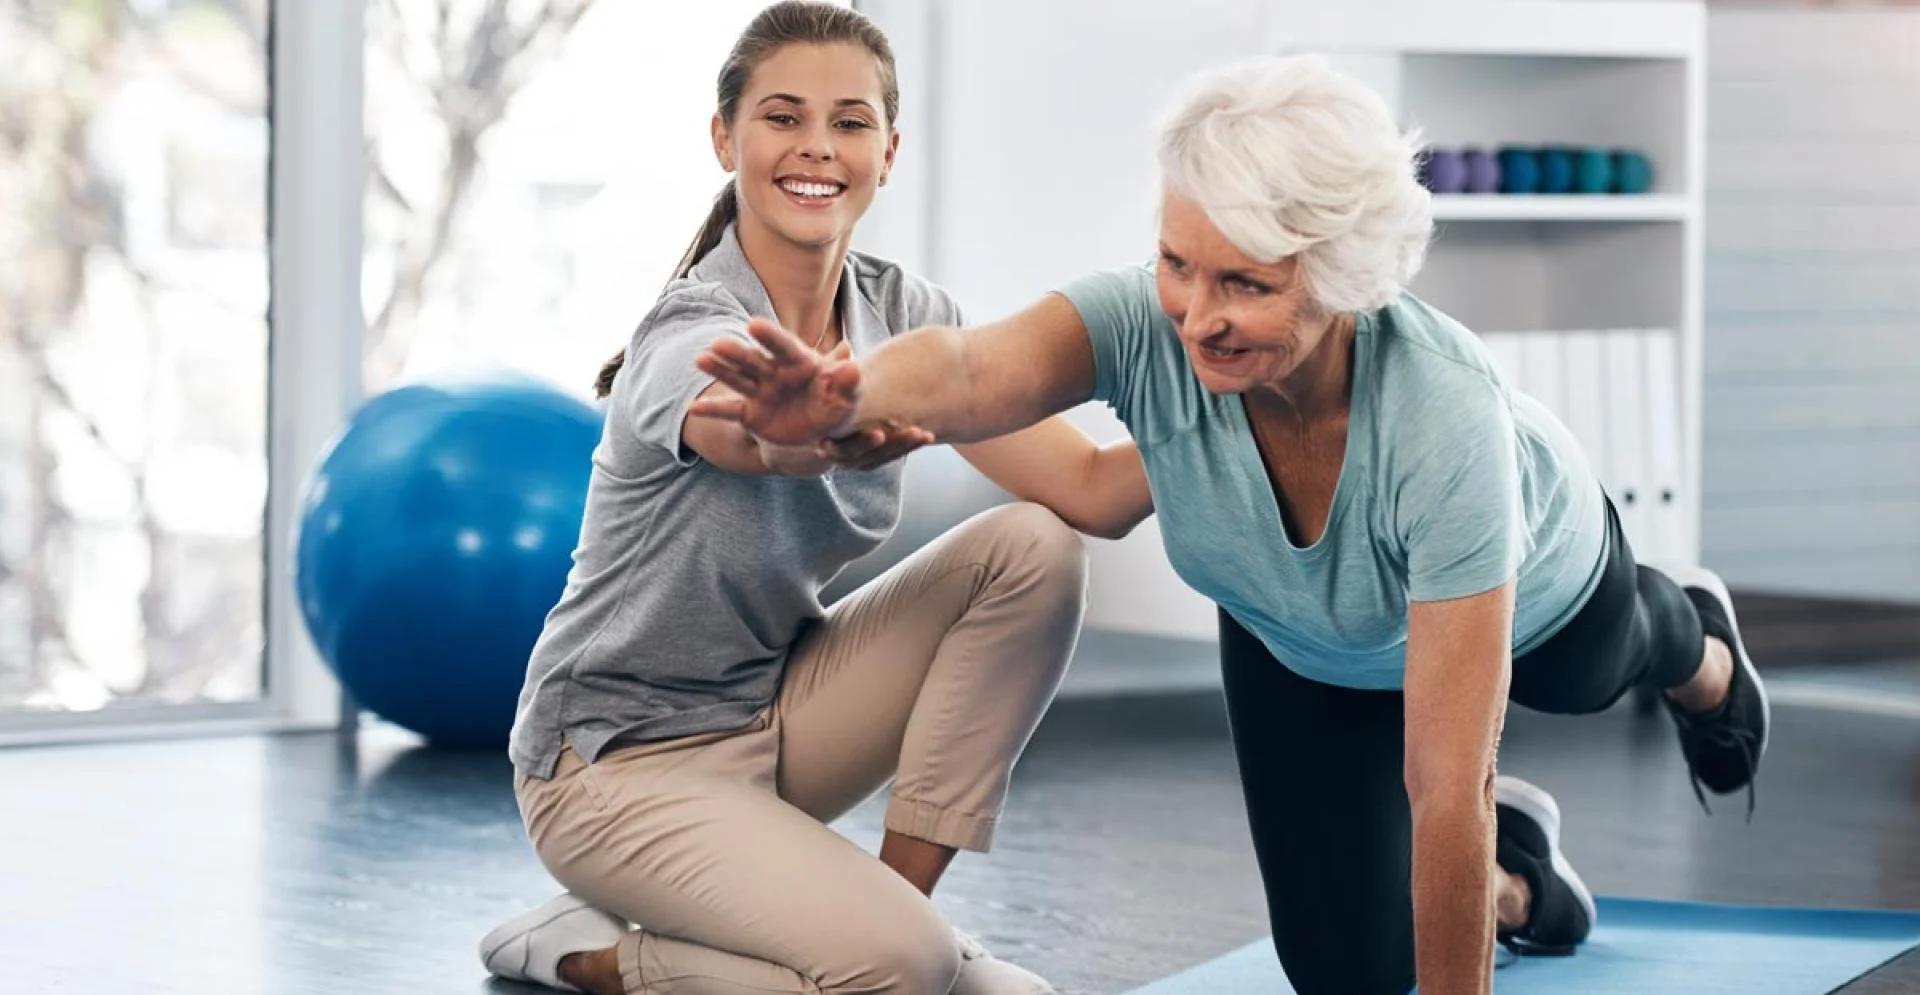 A light-skinned, female presenting therapist assisting a white-haired light-skinned female presenting patient with a floor exercise on a blue yoga mat